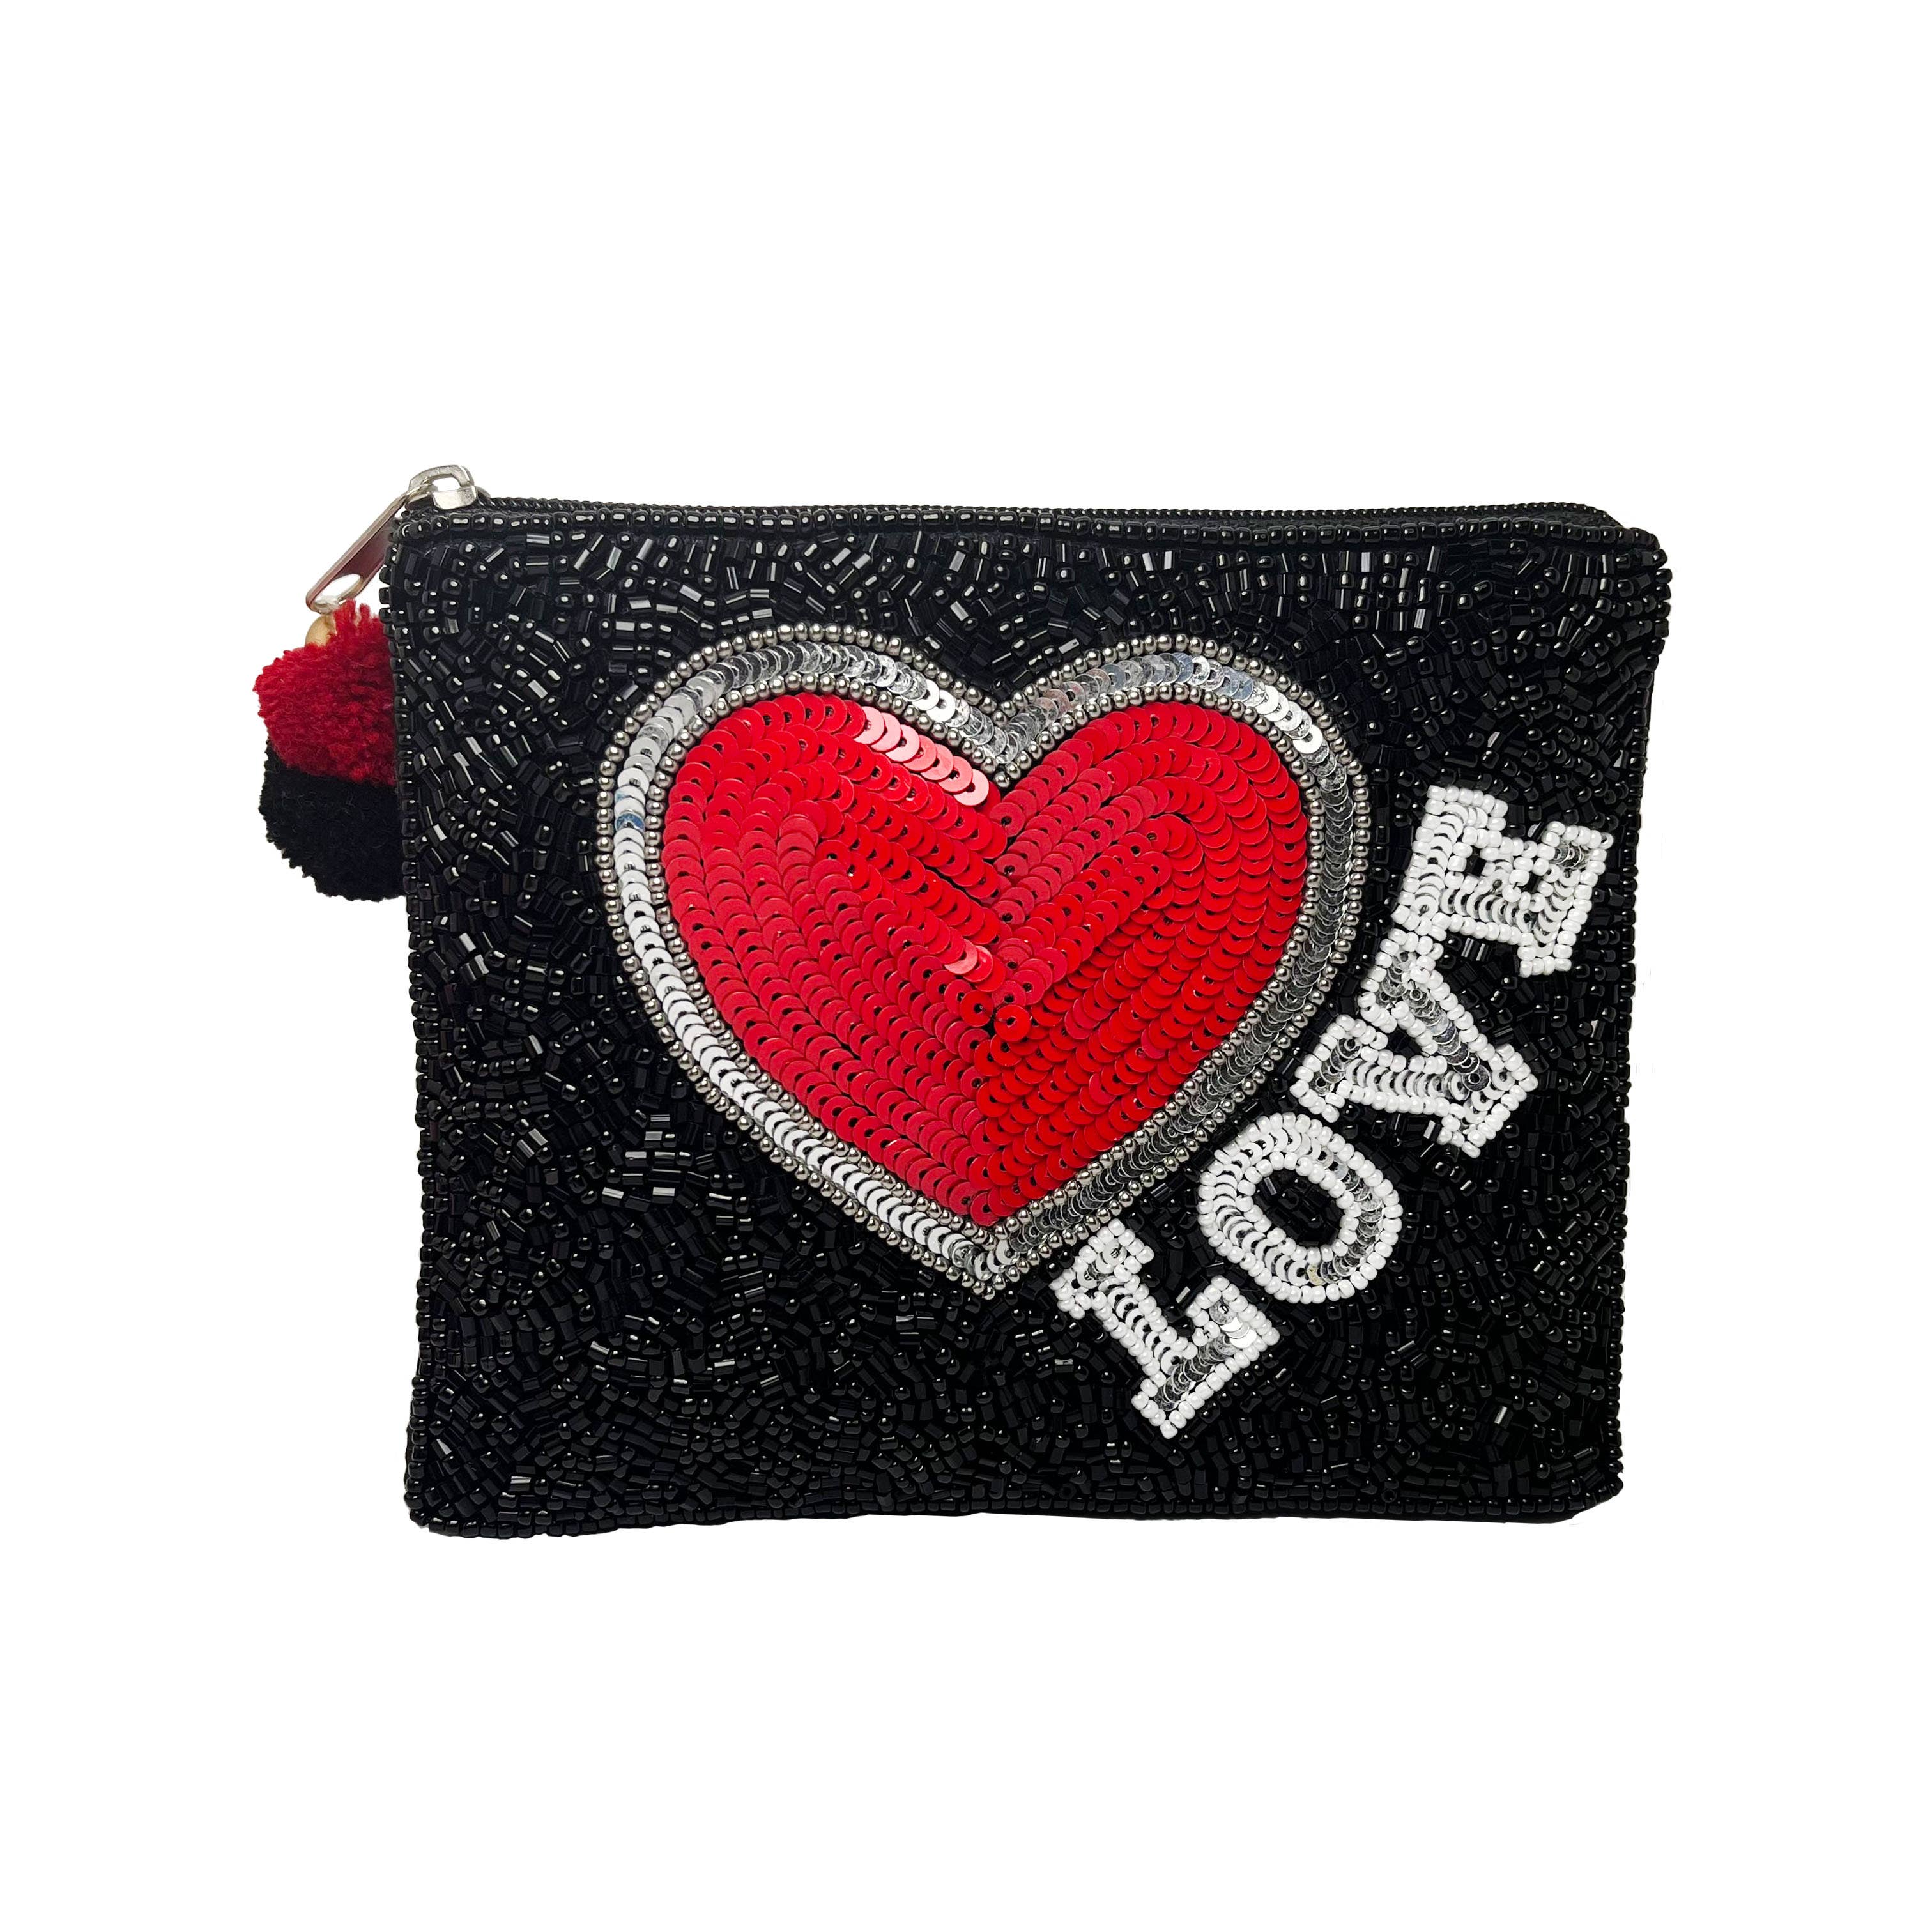 Red Heart Seed Bead Coin Purse